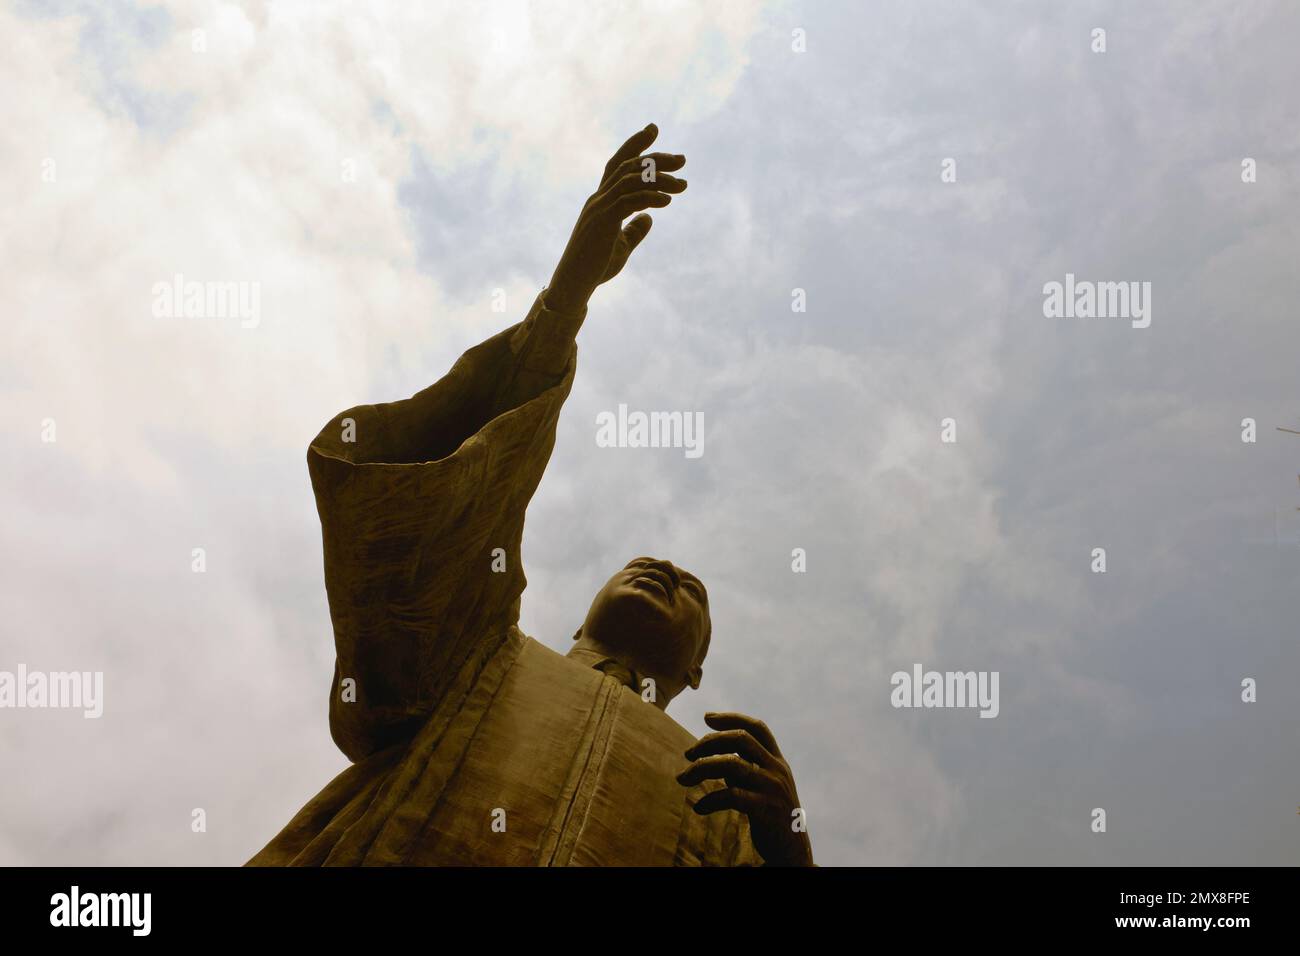 Low Angle View of Martin Luther King, Jr. Statue, University of Texas, Austin, Texas, USA Stock Photo